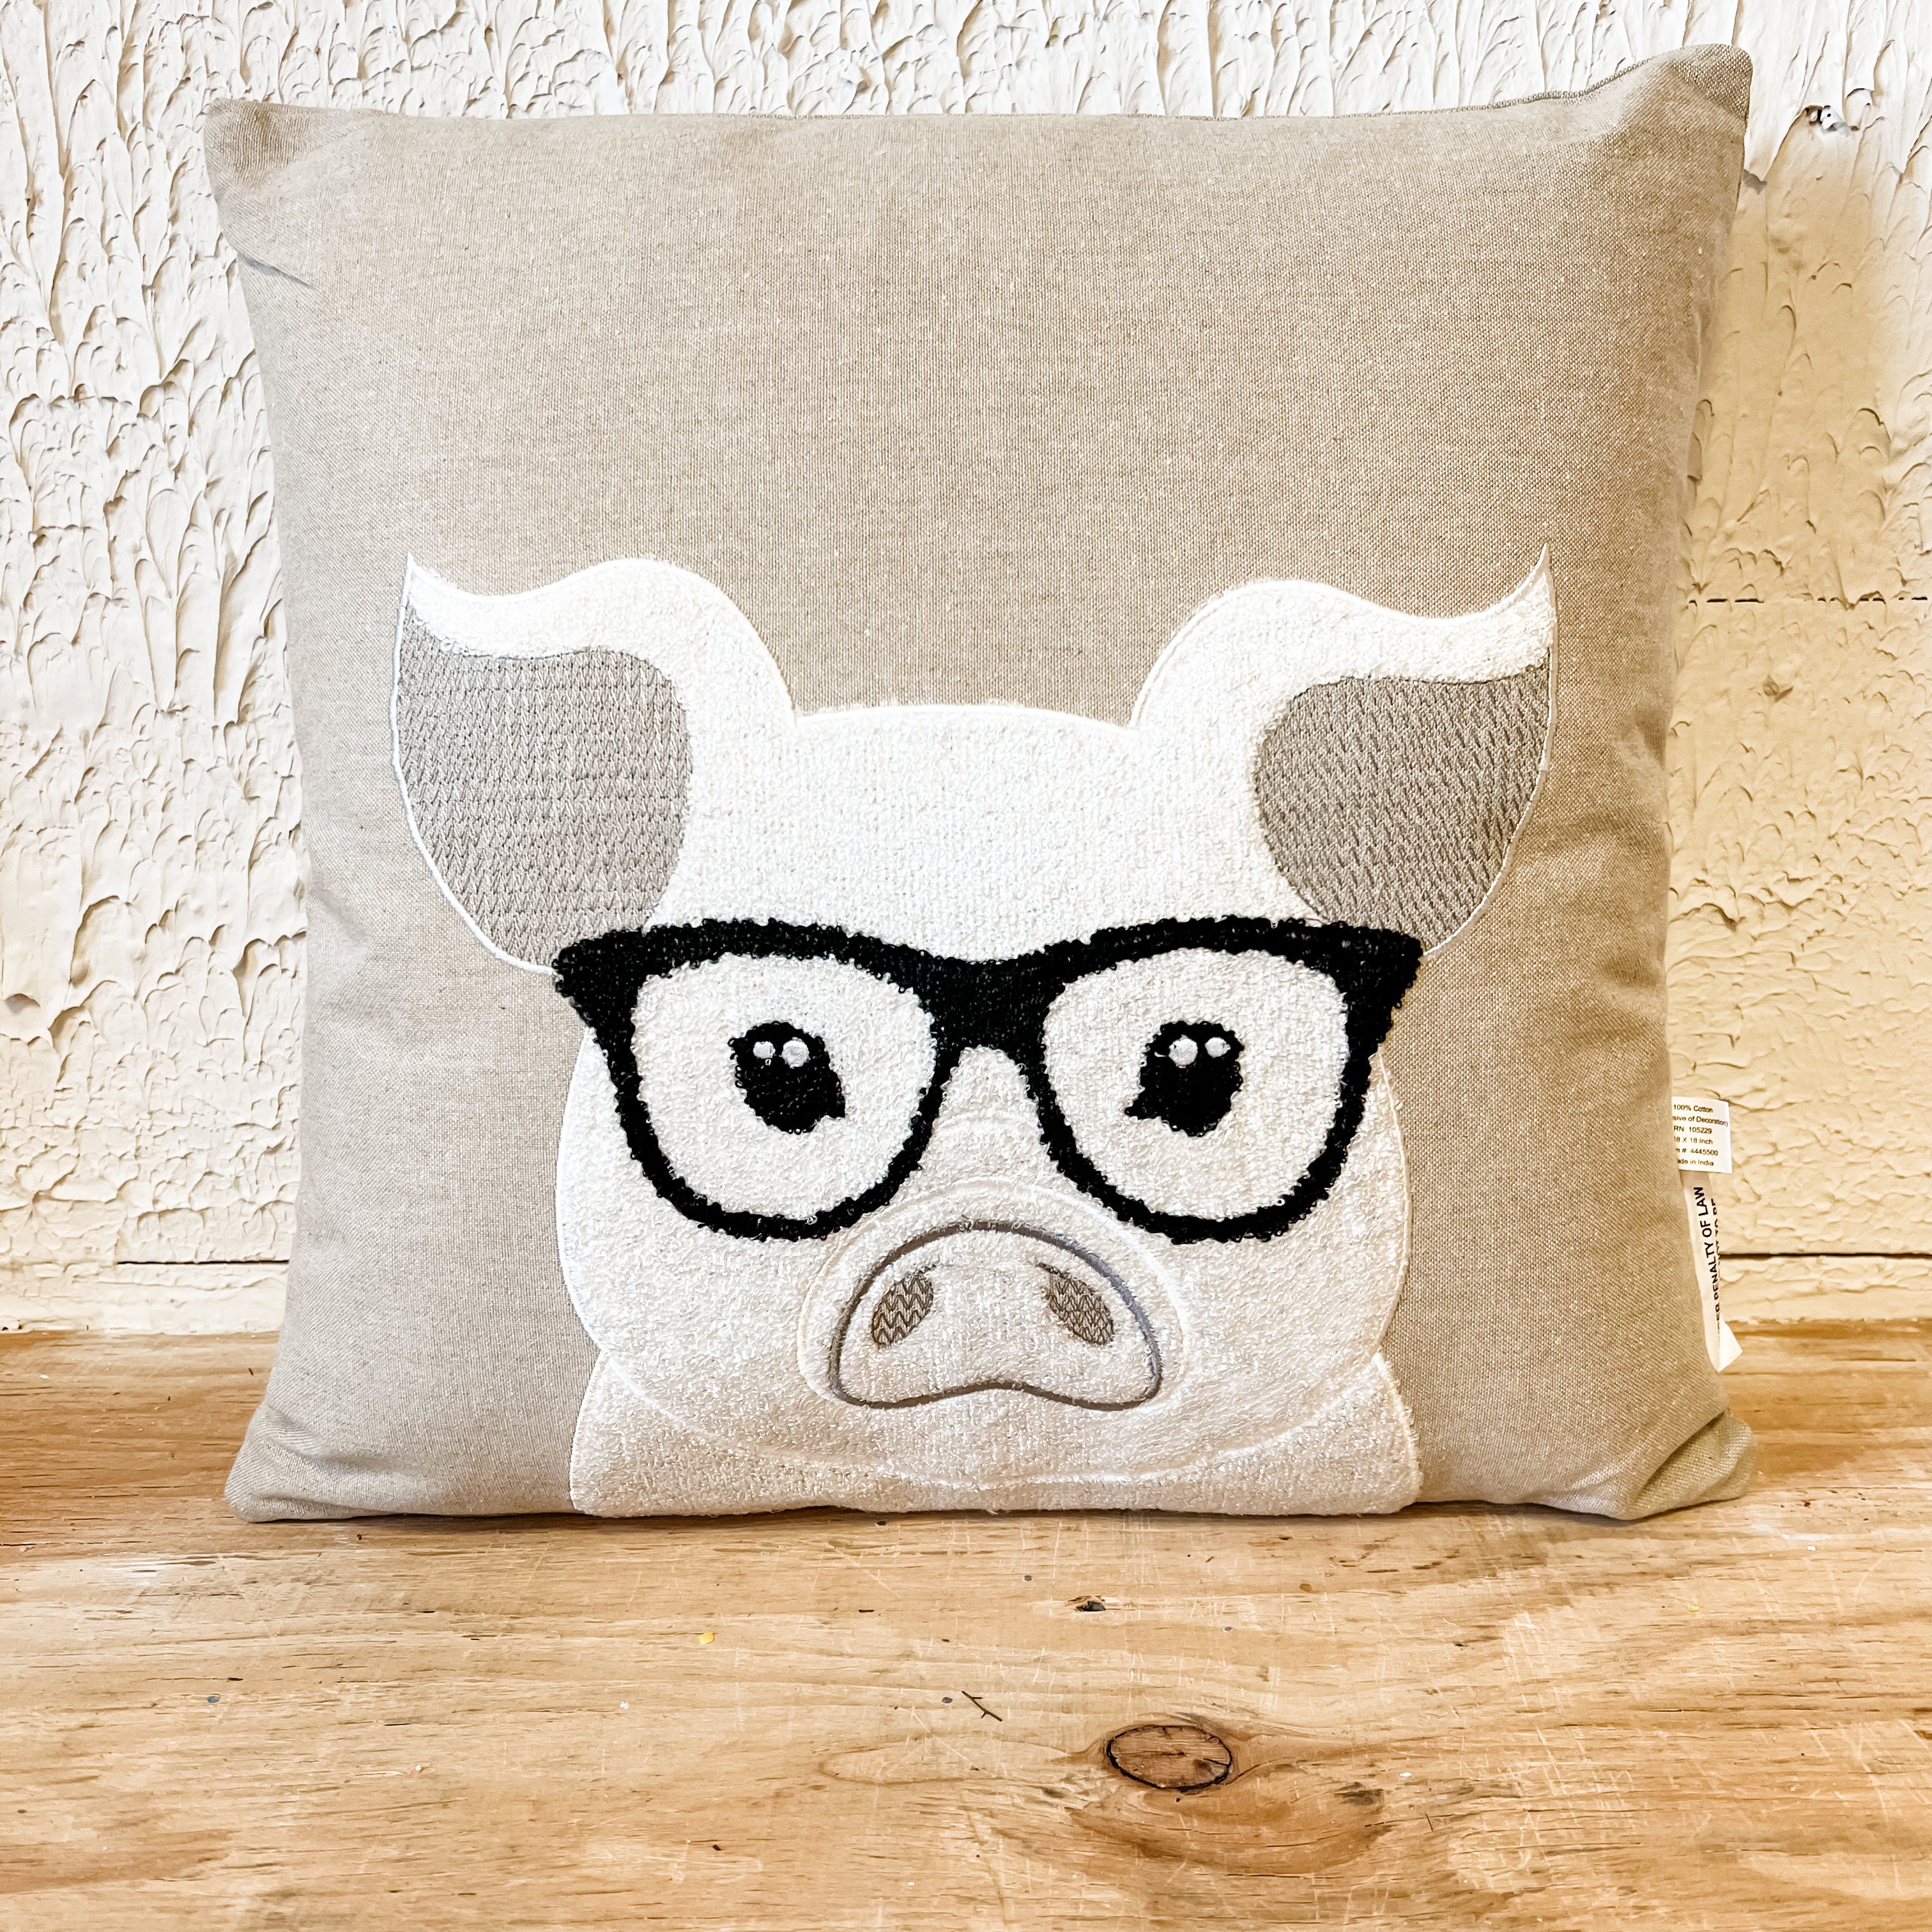 18” square pig pillow the rustic barn ct